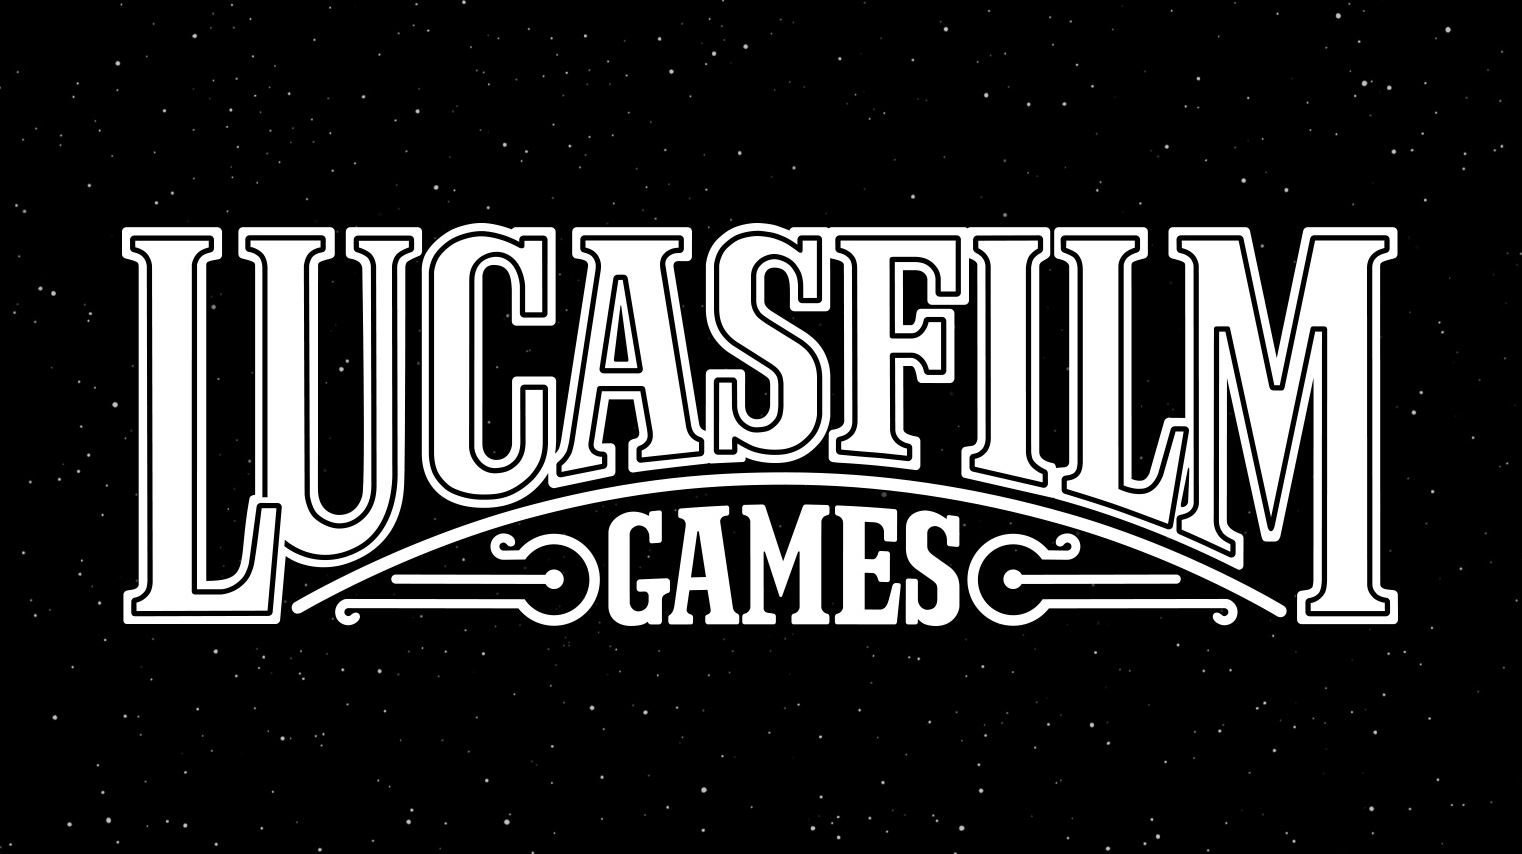 lucasfilm-games-will-announce-projects-in-the-next-year-that-aim-to-live-up-to-its-classic-legacy